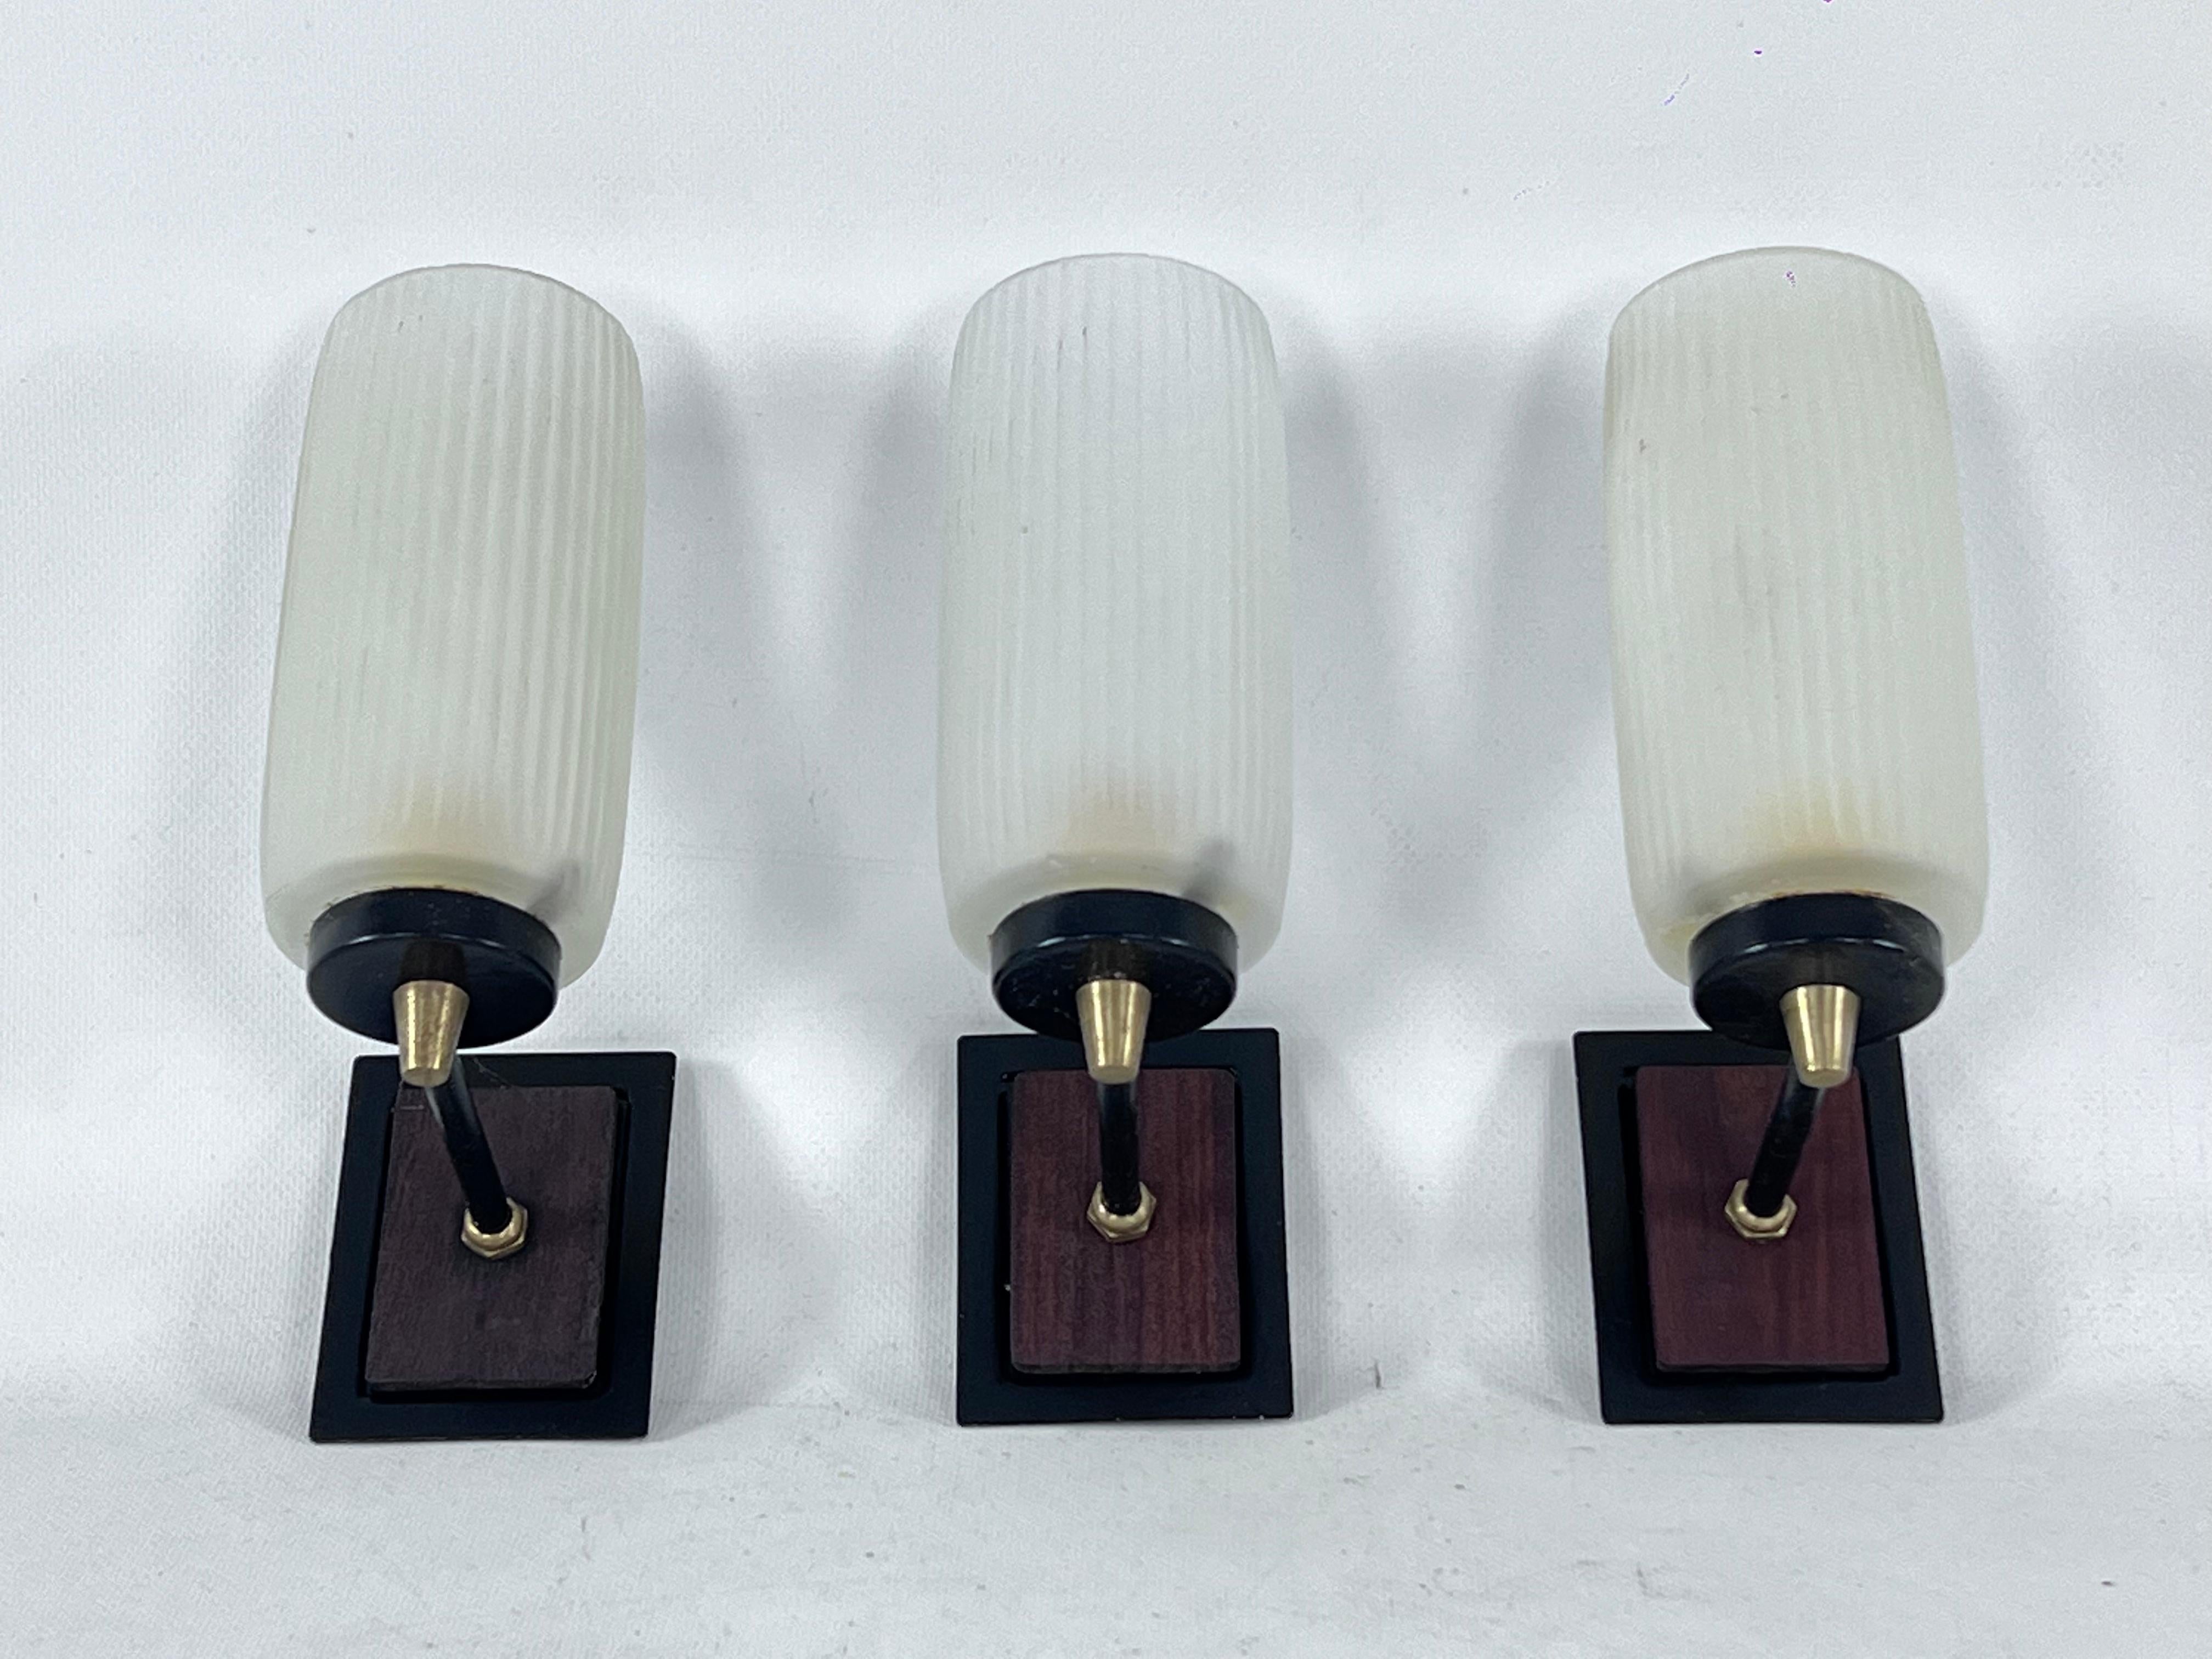 Great vintage condition with normal trace of age and use for this set of three sconces produced in Italy during the 50s. Made from glass, brass, lacquer and wood. No chips or cracks